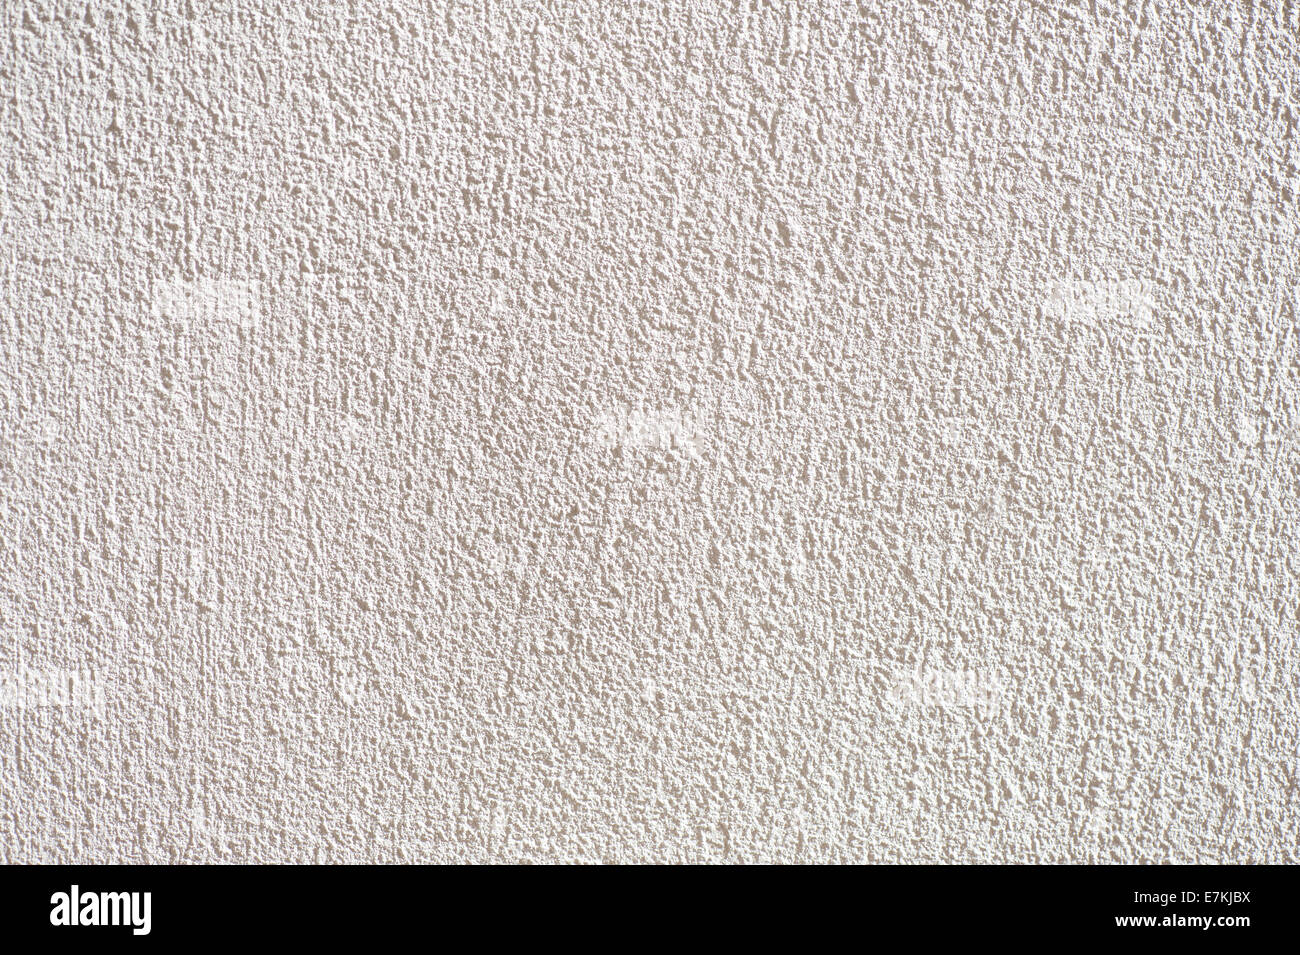 White grained wall surface texture abstract Stock Photo